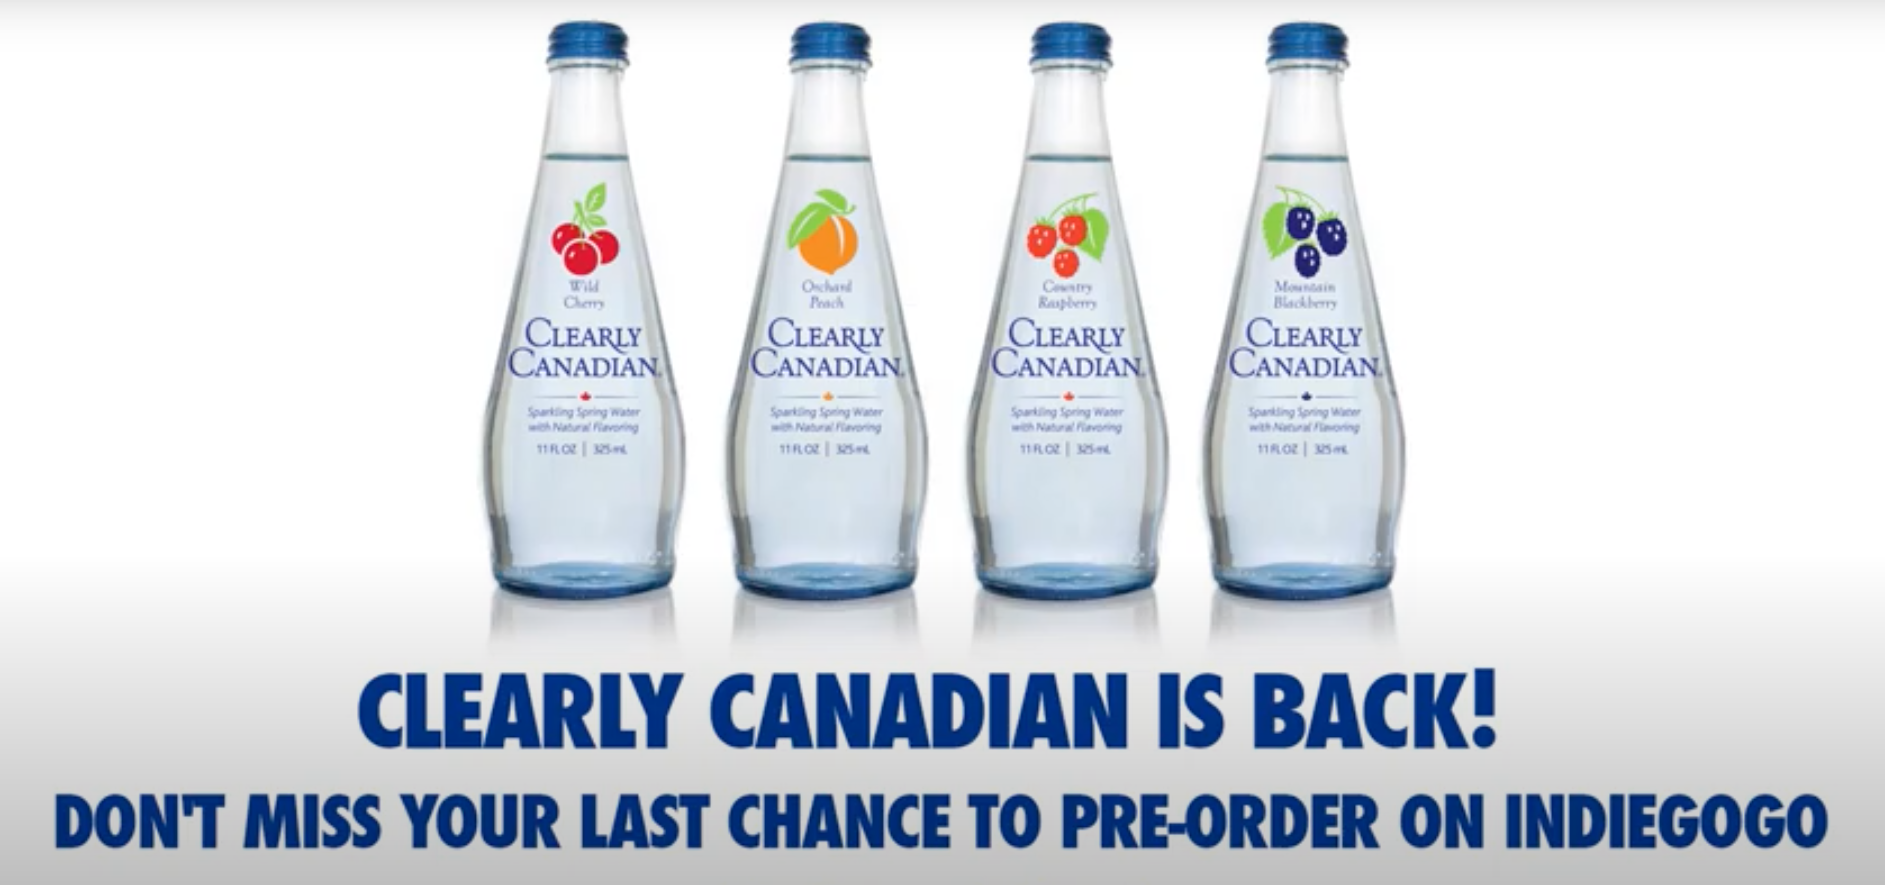 New ad for Clearly Canadian saying that the soda &quot;is back!&quot;